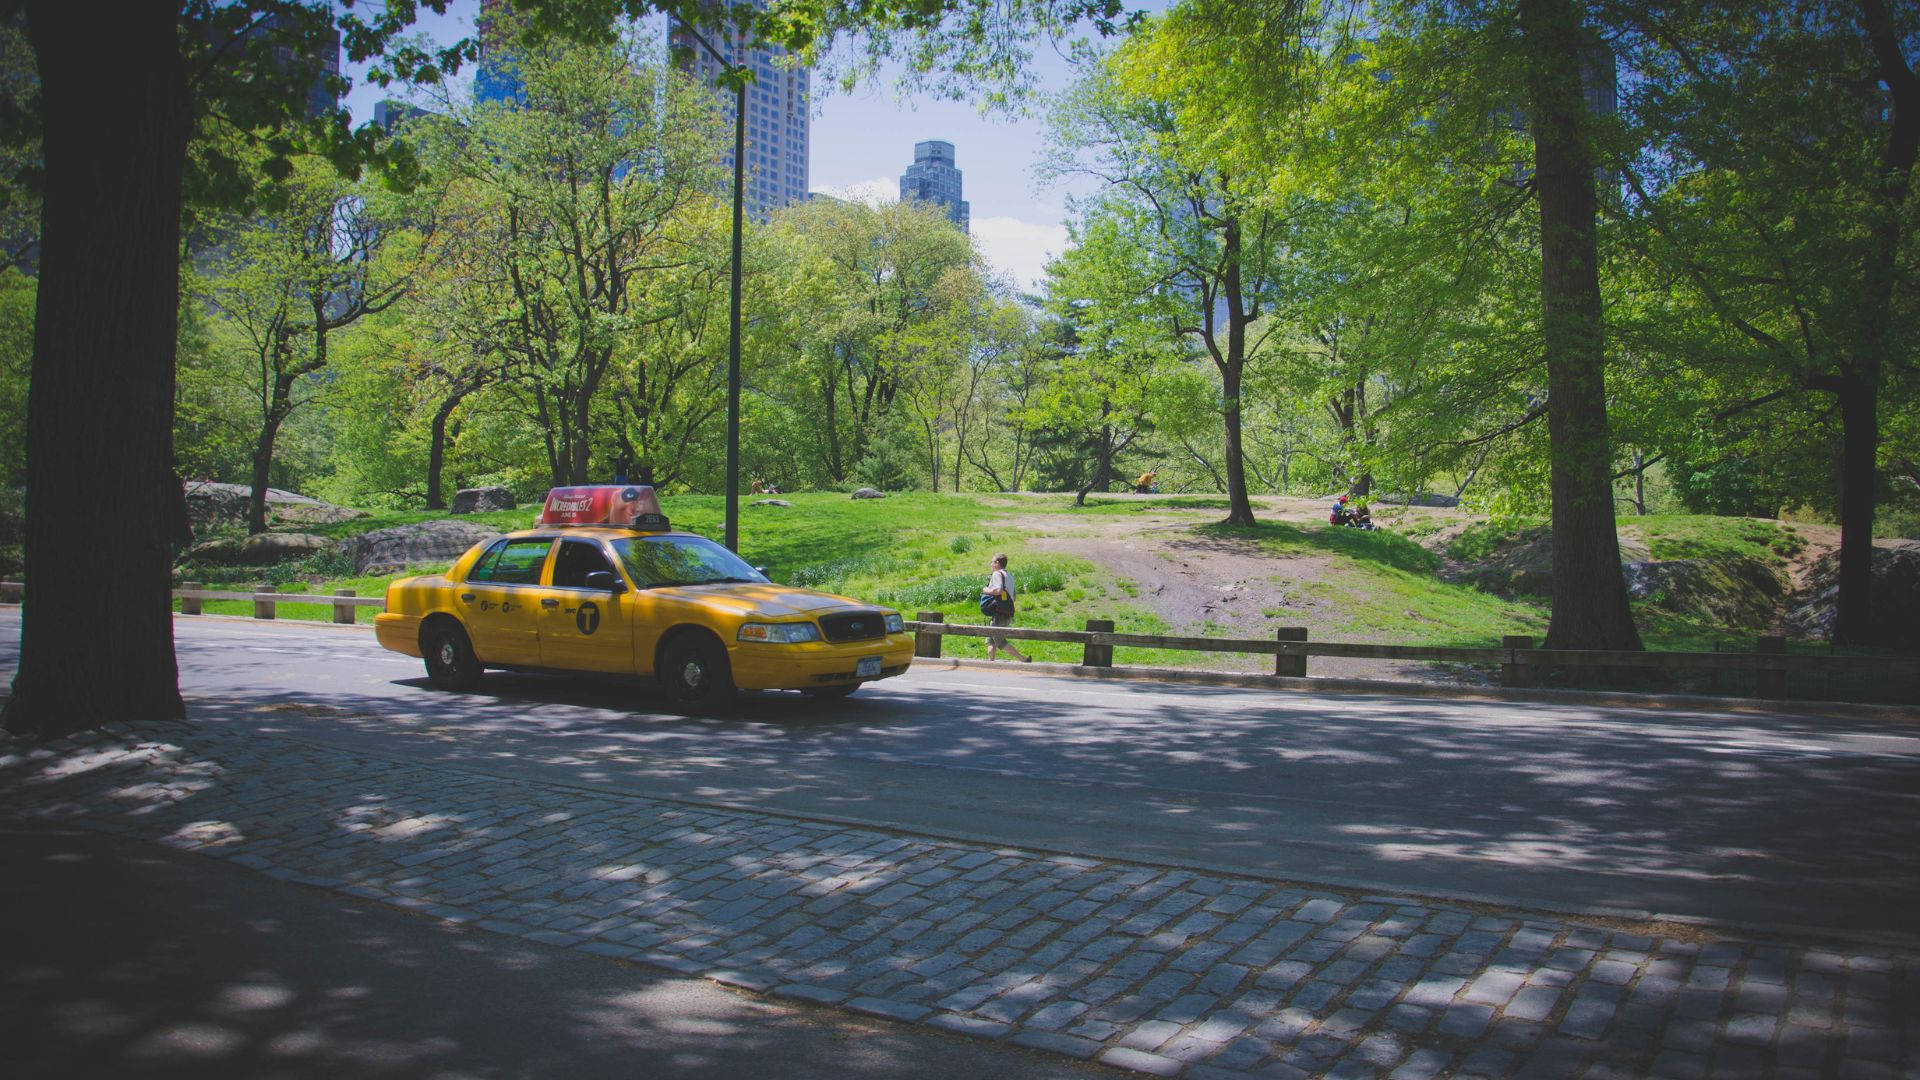 Yellow Taxi In A Serene Park Background